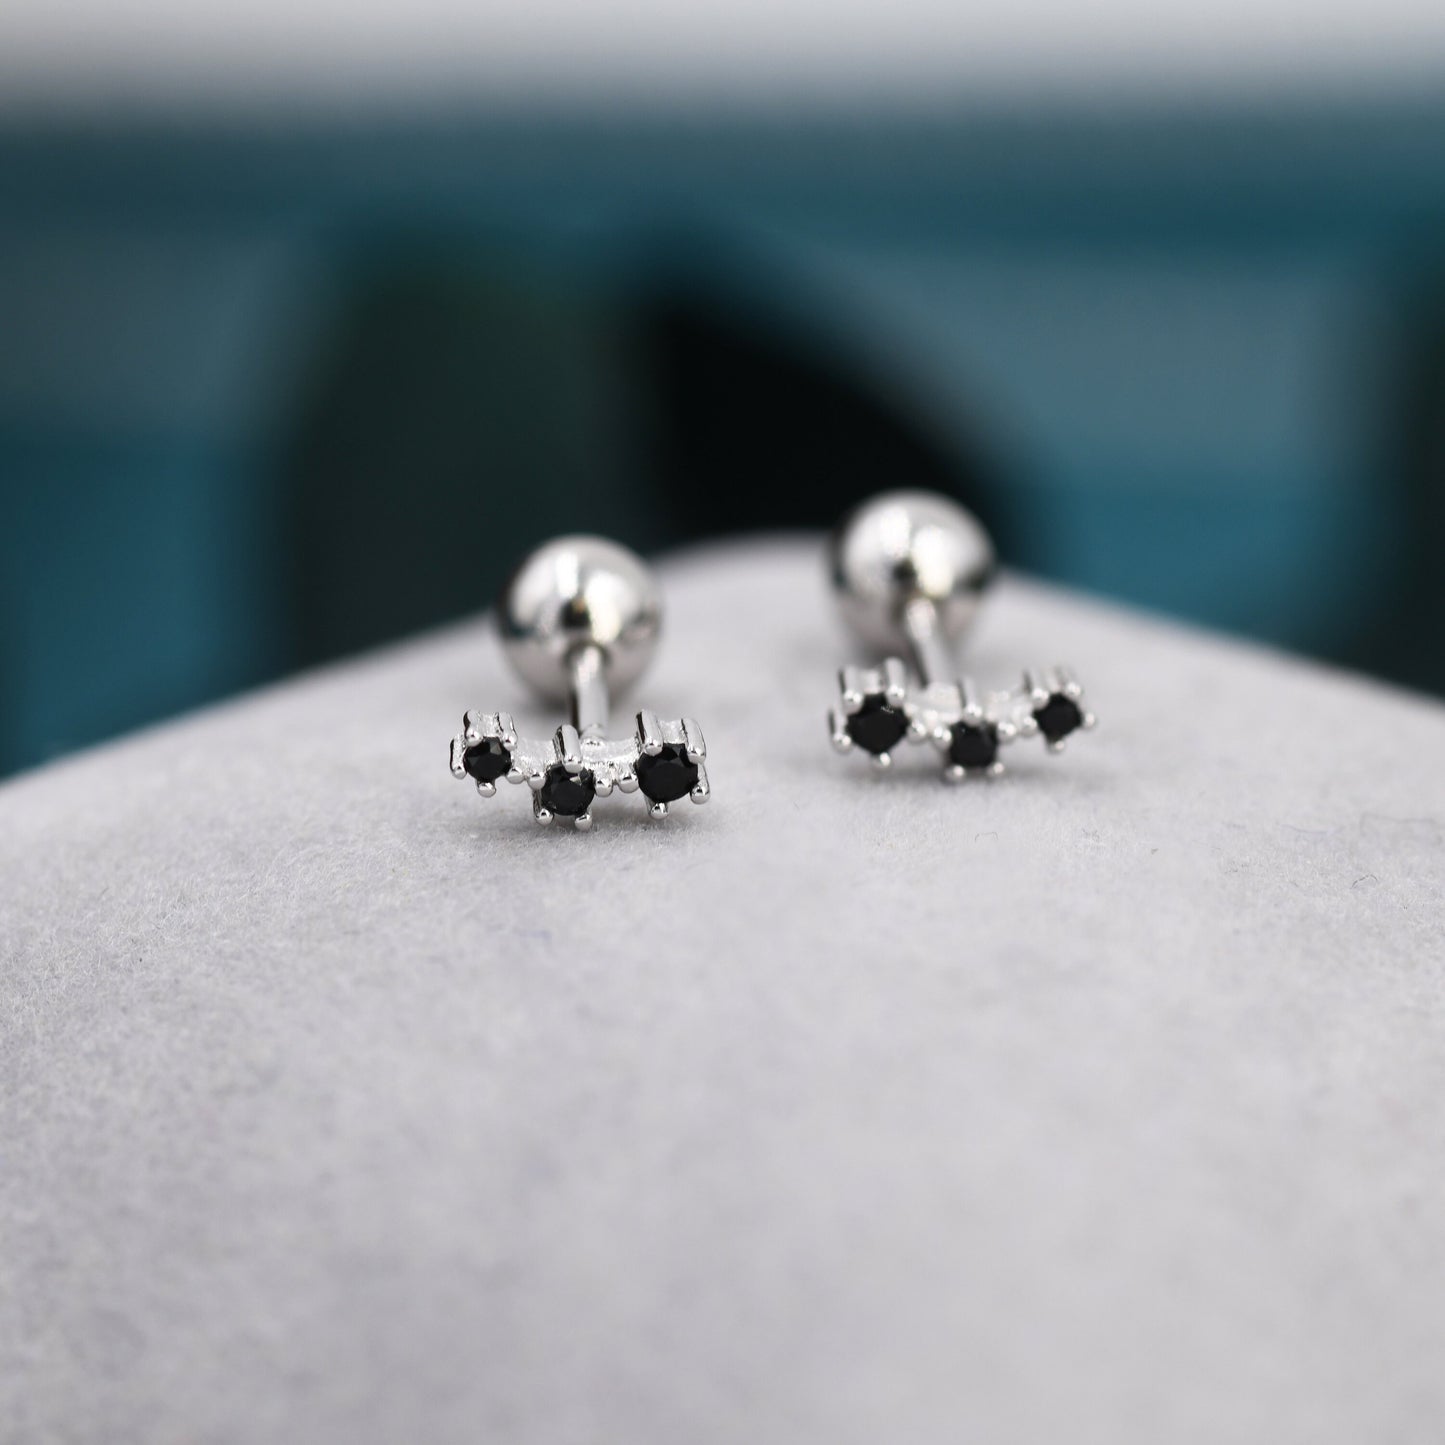 Tiny Black CZ Trio Screw Back Earrings in Sterling Silver, Silver or Gold, Tiny Three Star CZ Barbell Earrings, Stacking Earrings